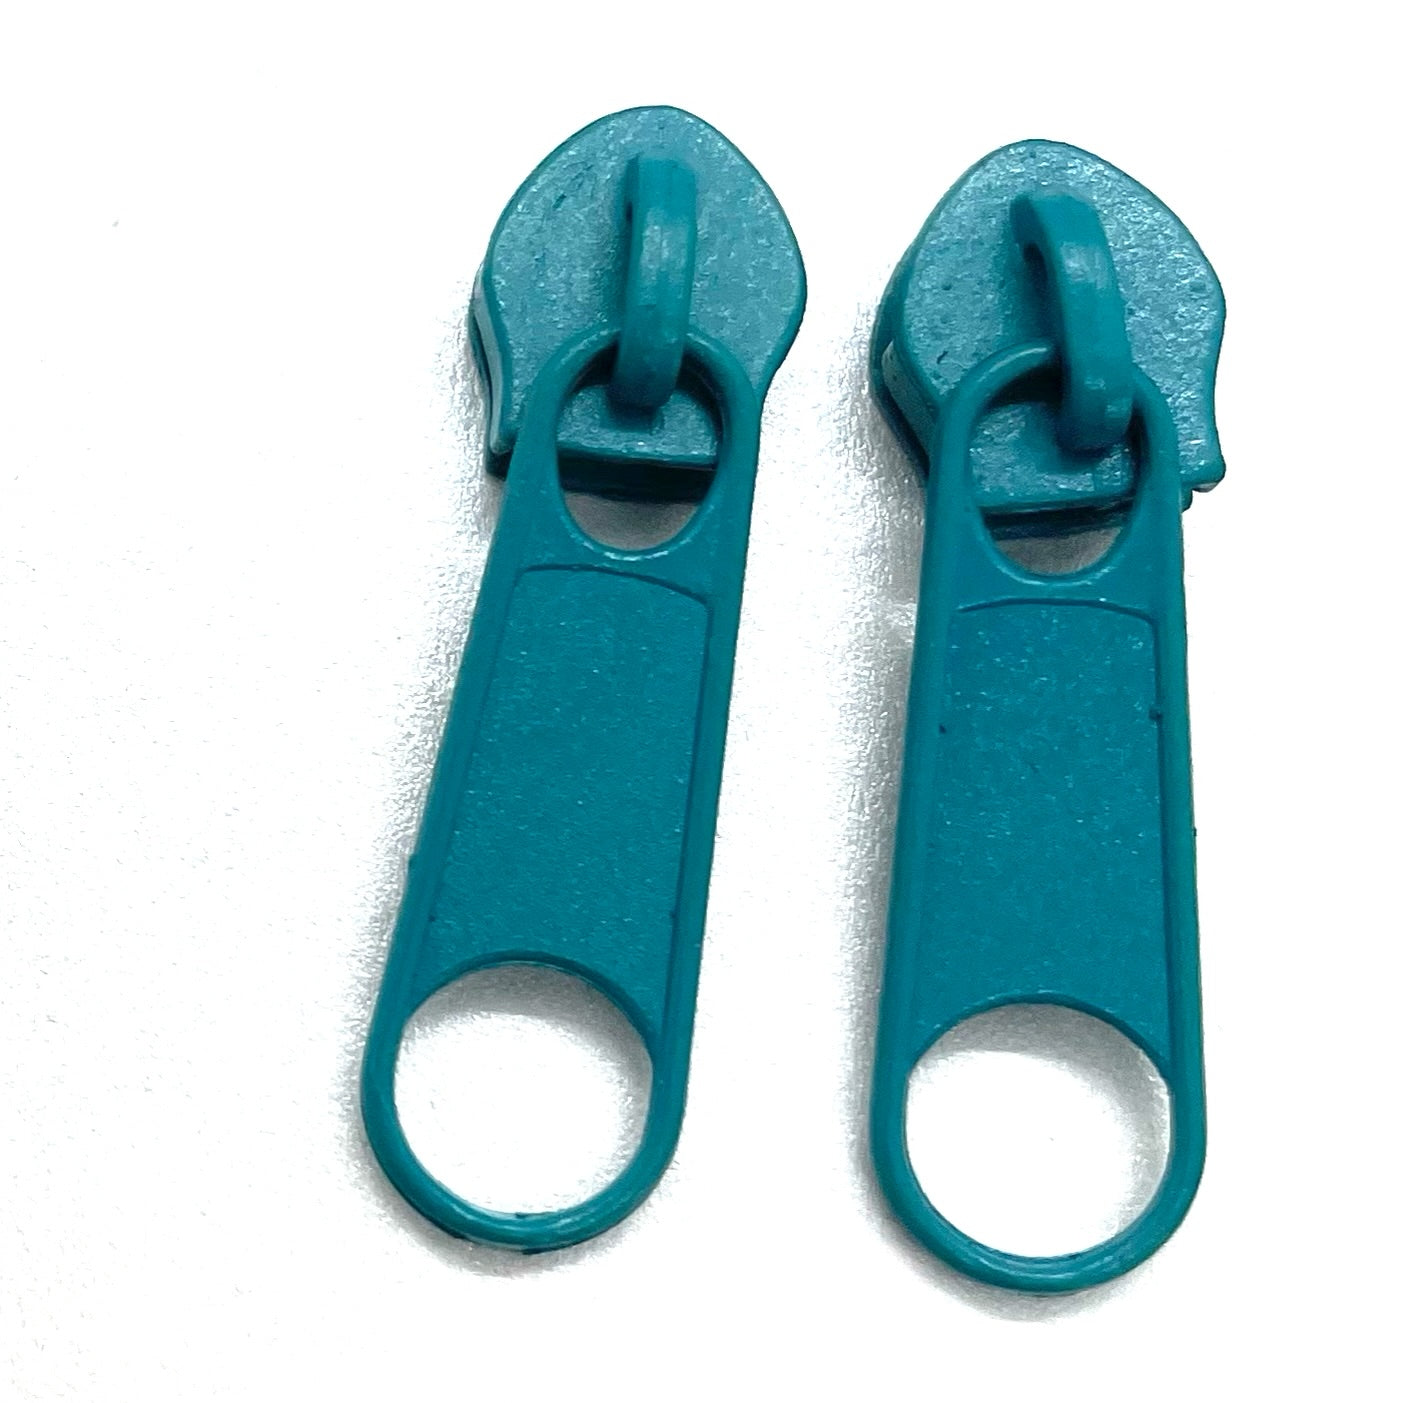 teal continuous long chain zipper tape and sliders in size 3 and 5